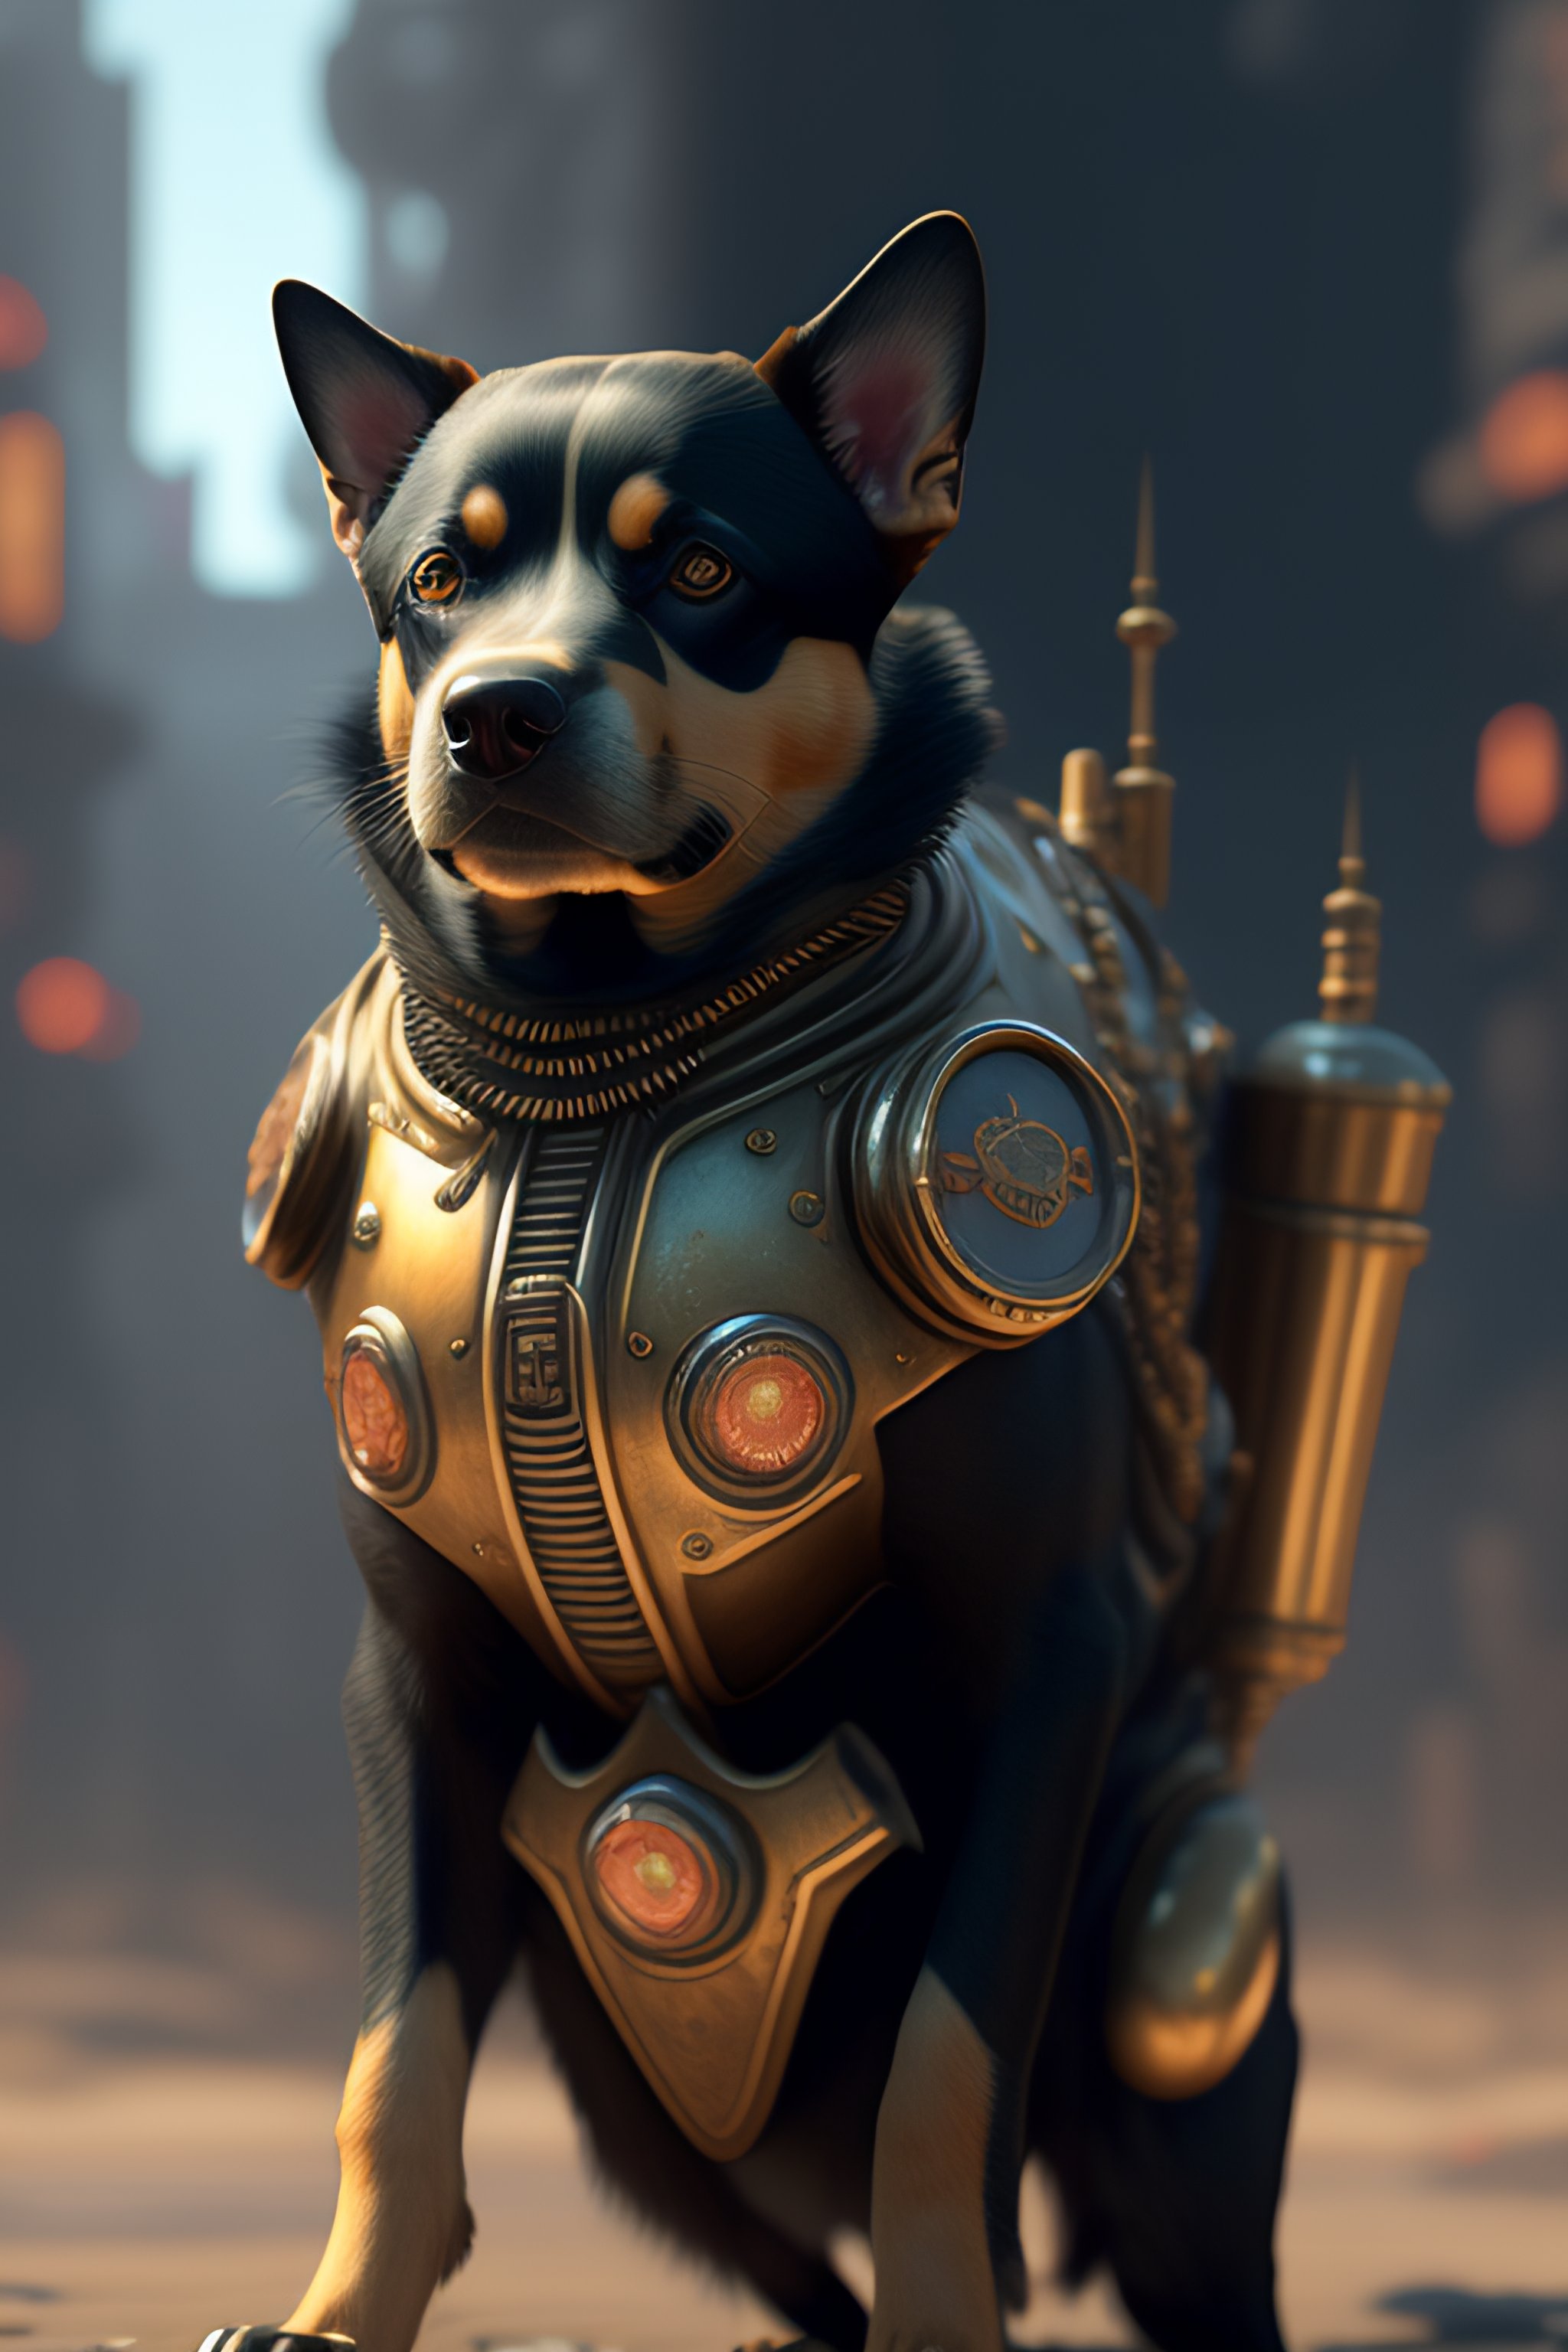 Lexica - Malicious Overseer of Fallout 4, steampunk masterpiece by ...